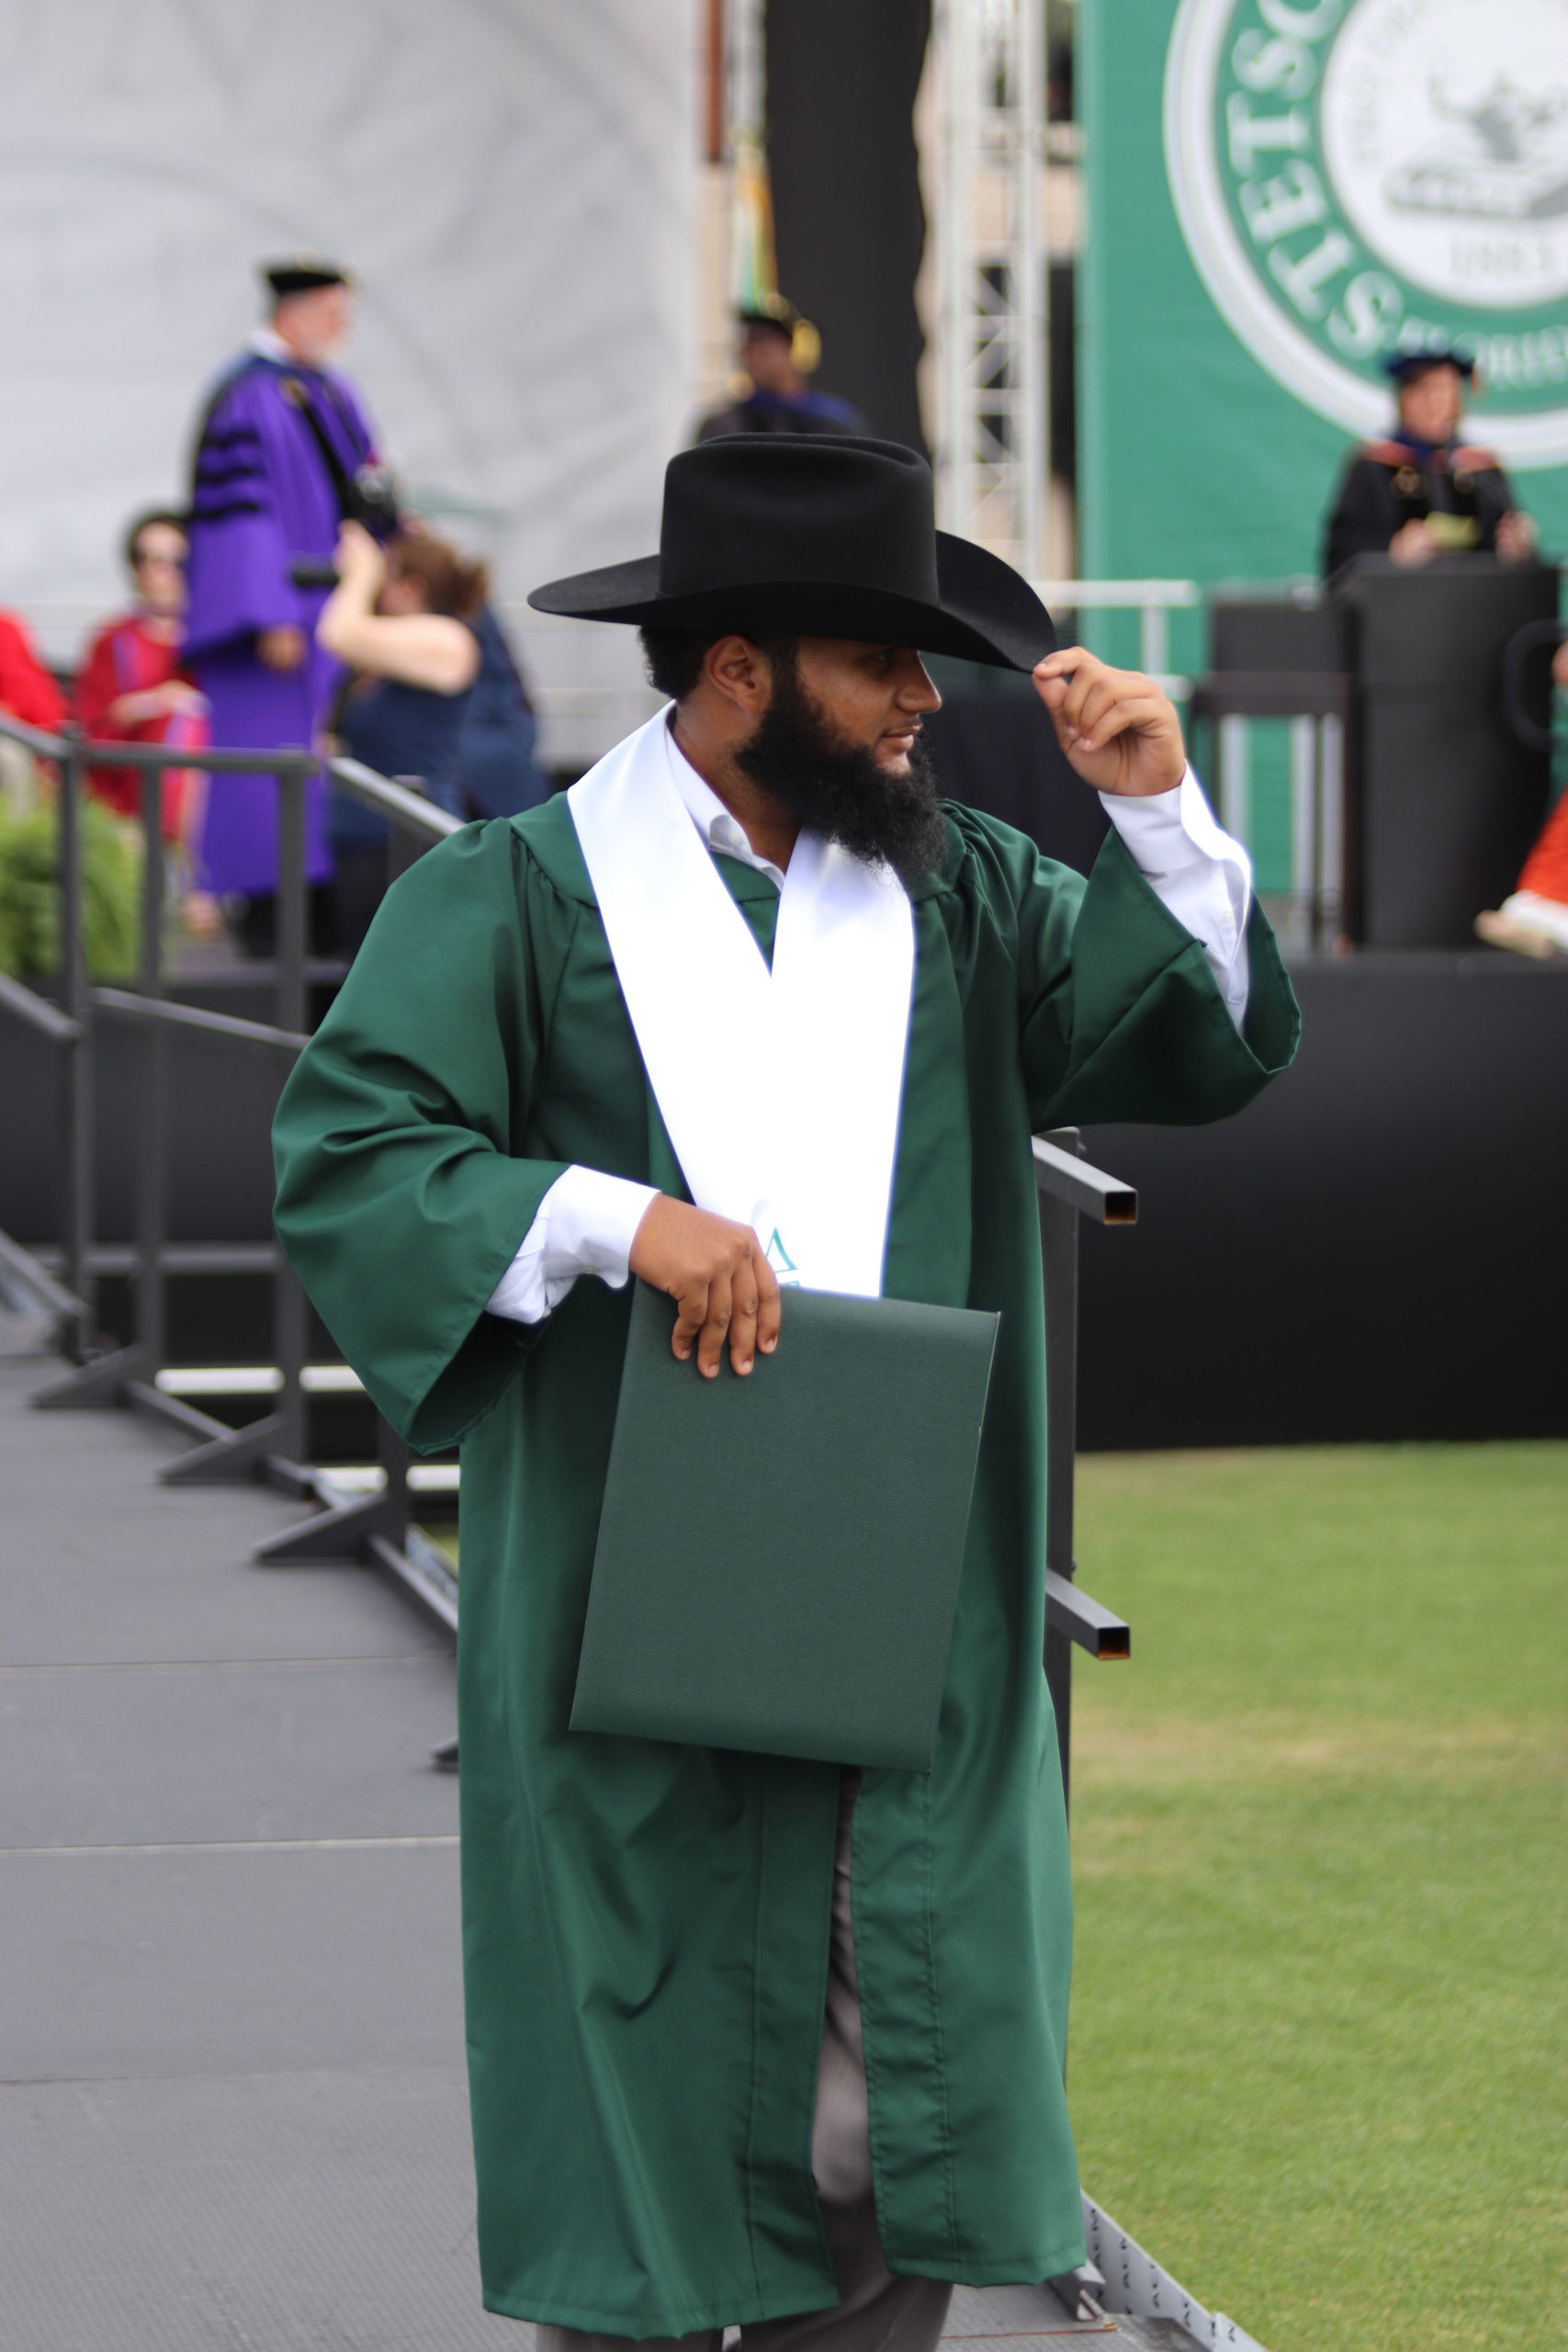 A graduate at Commencement wears a Stetson hat,.